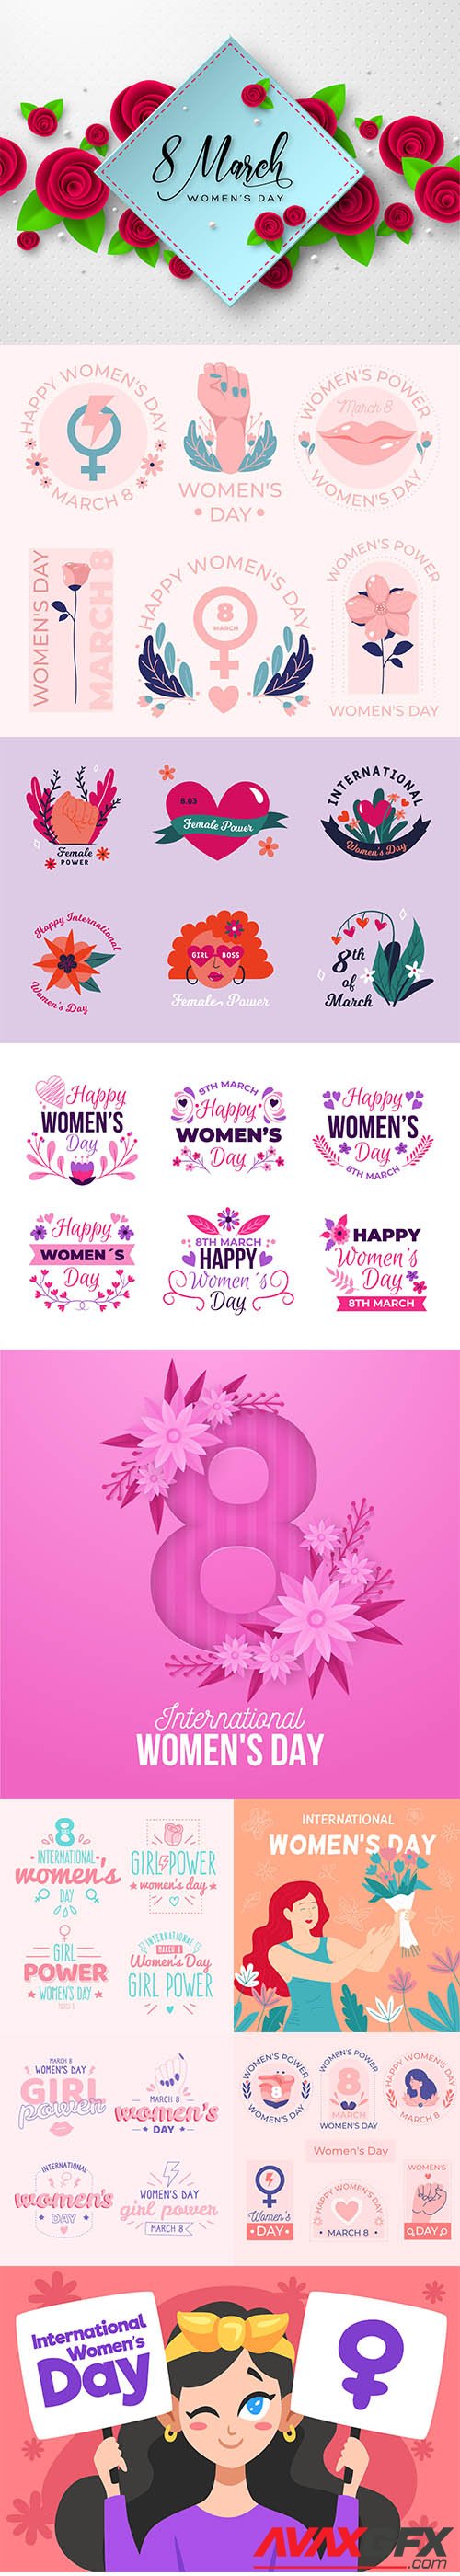 Hand-drawn international womens day illustration and badge collection